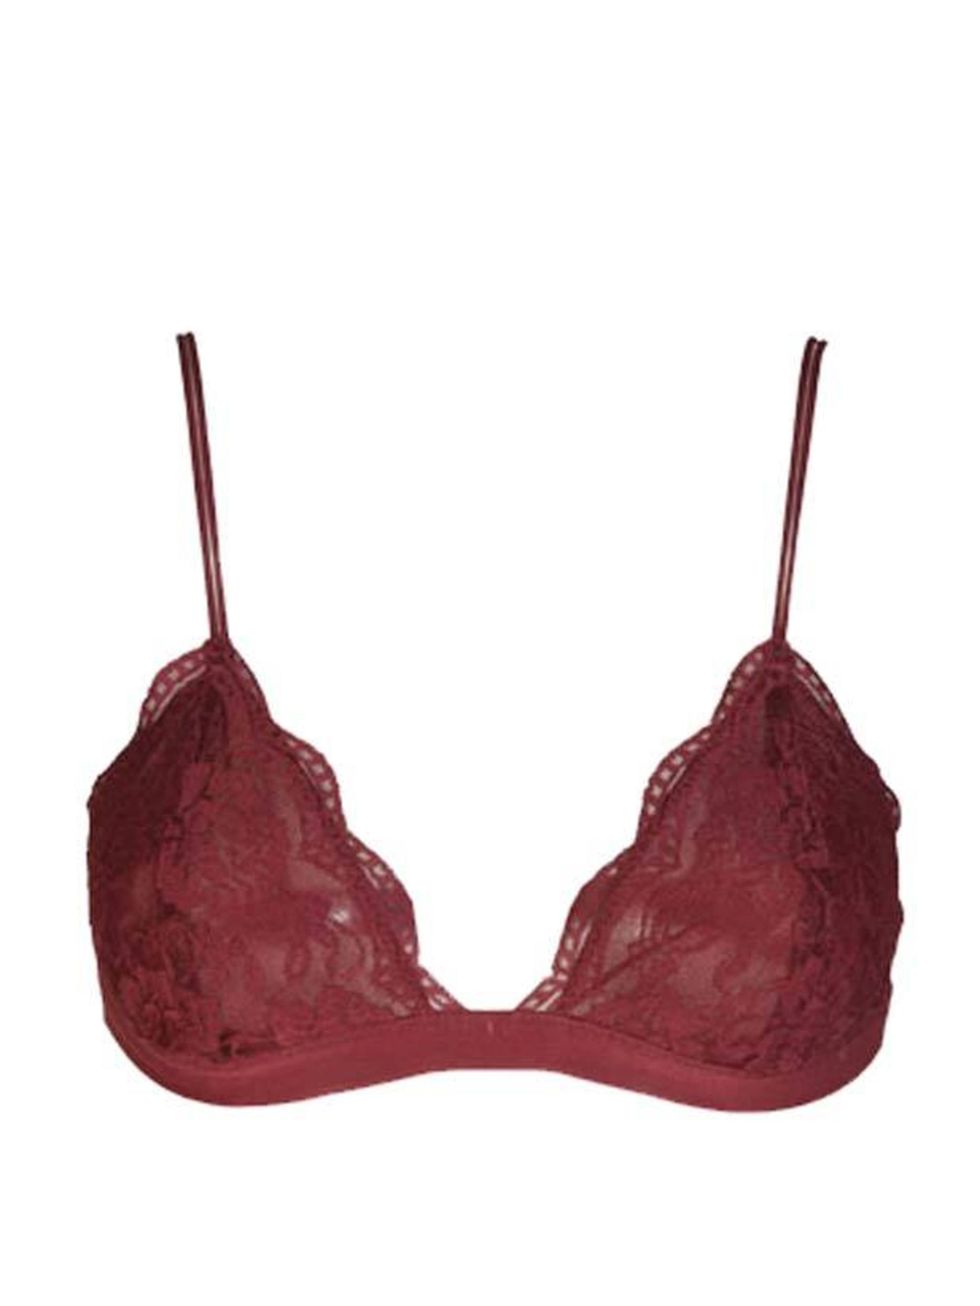 <p><a href="http://www.urbanoutfitters.co.uk/lace-triangle-bra/invt/5741422432678/&amp;bklist=icat,5,shop,womens,womensclothing,wunderwear">Urban Outfitters</a> red lace bra, £16</p>